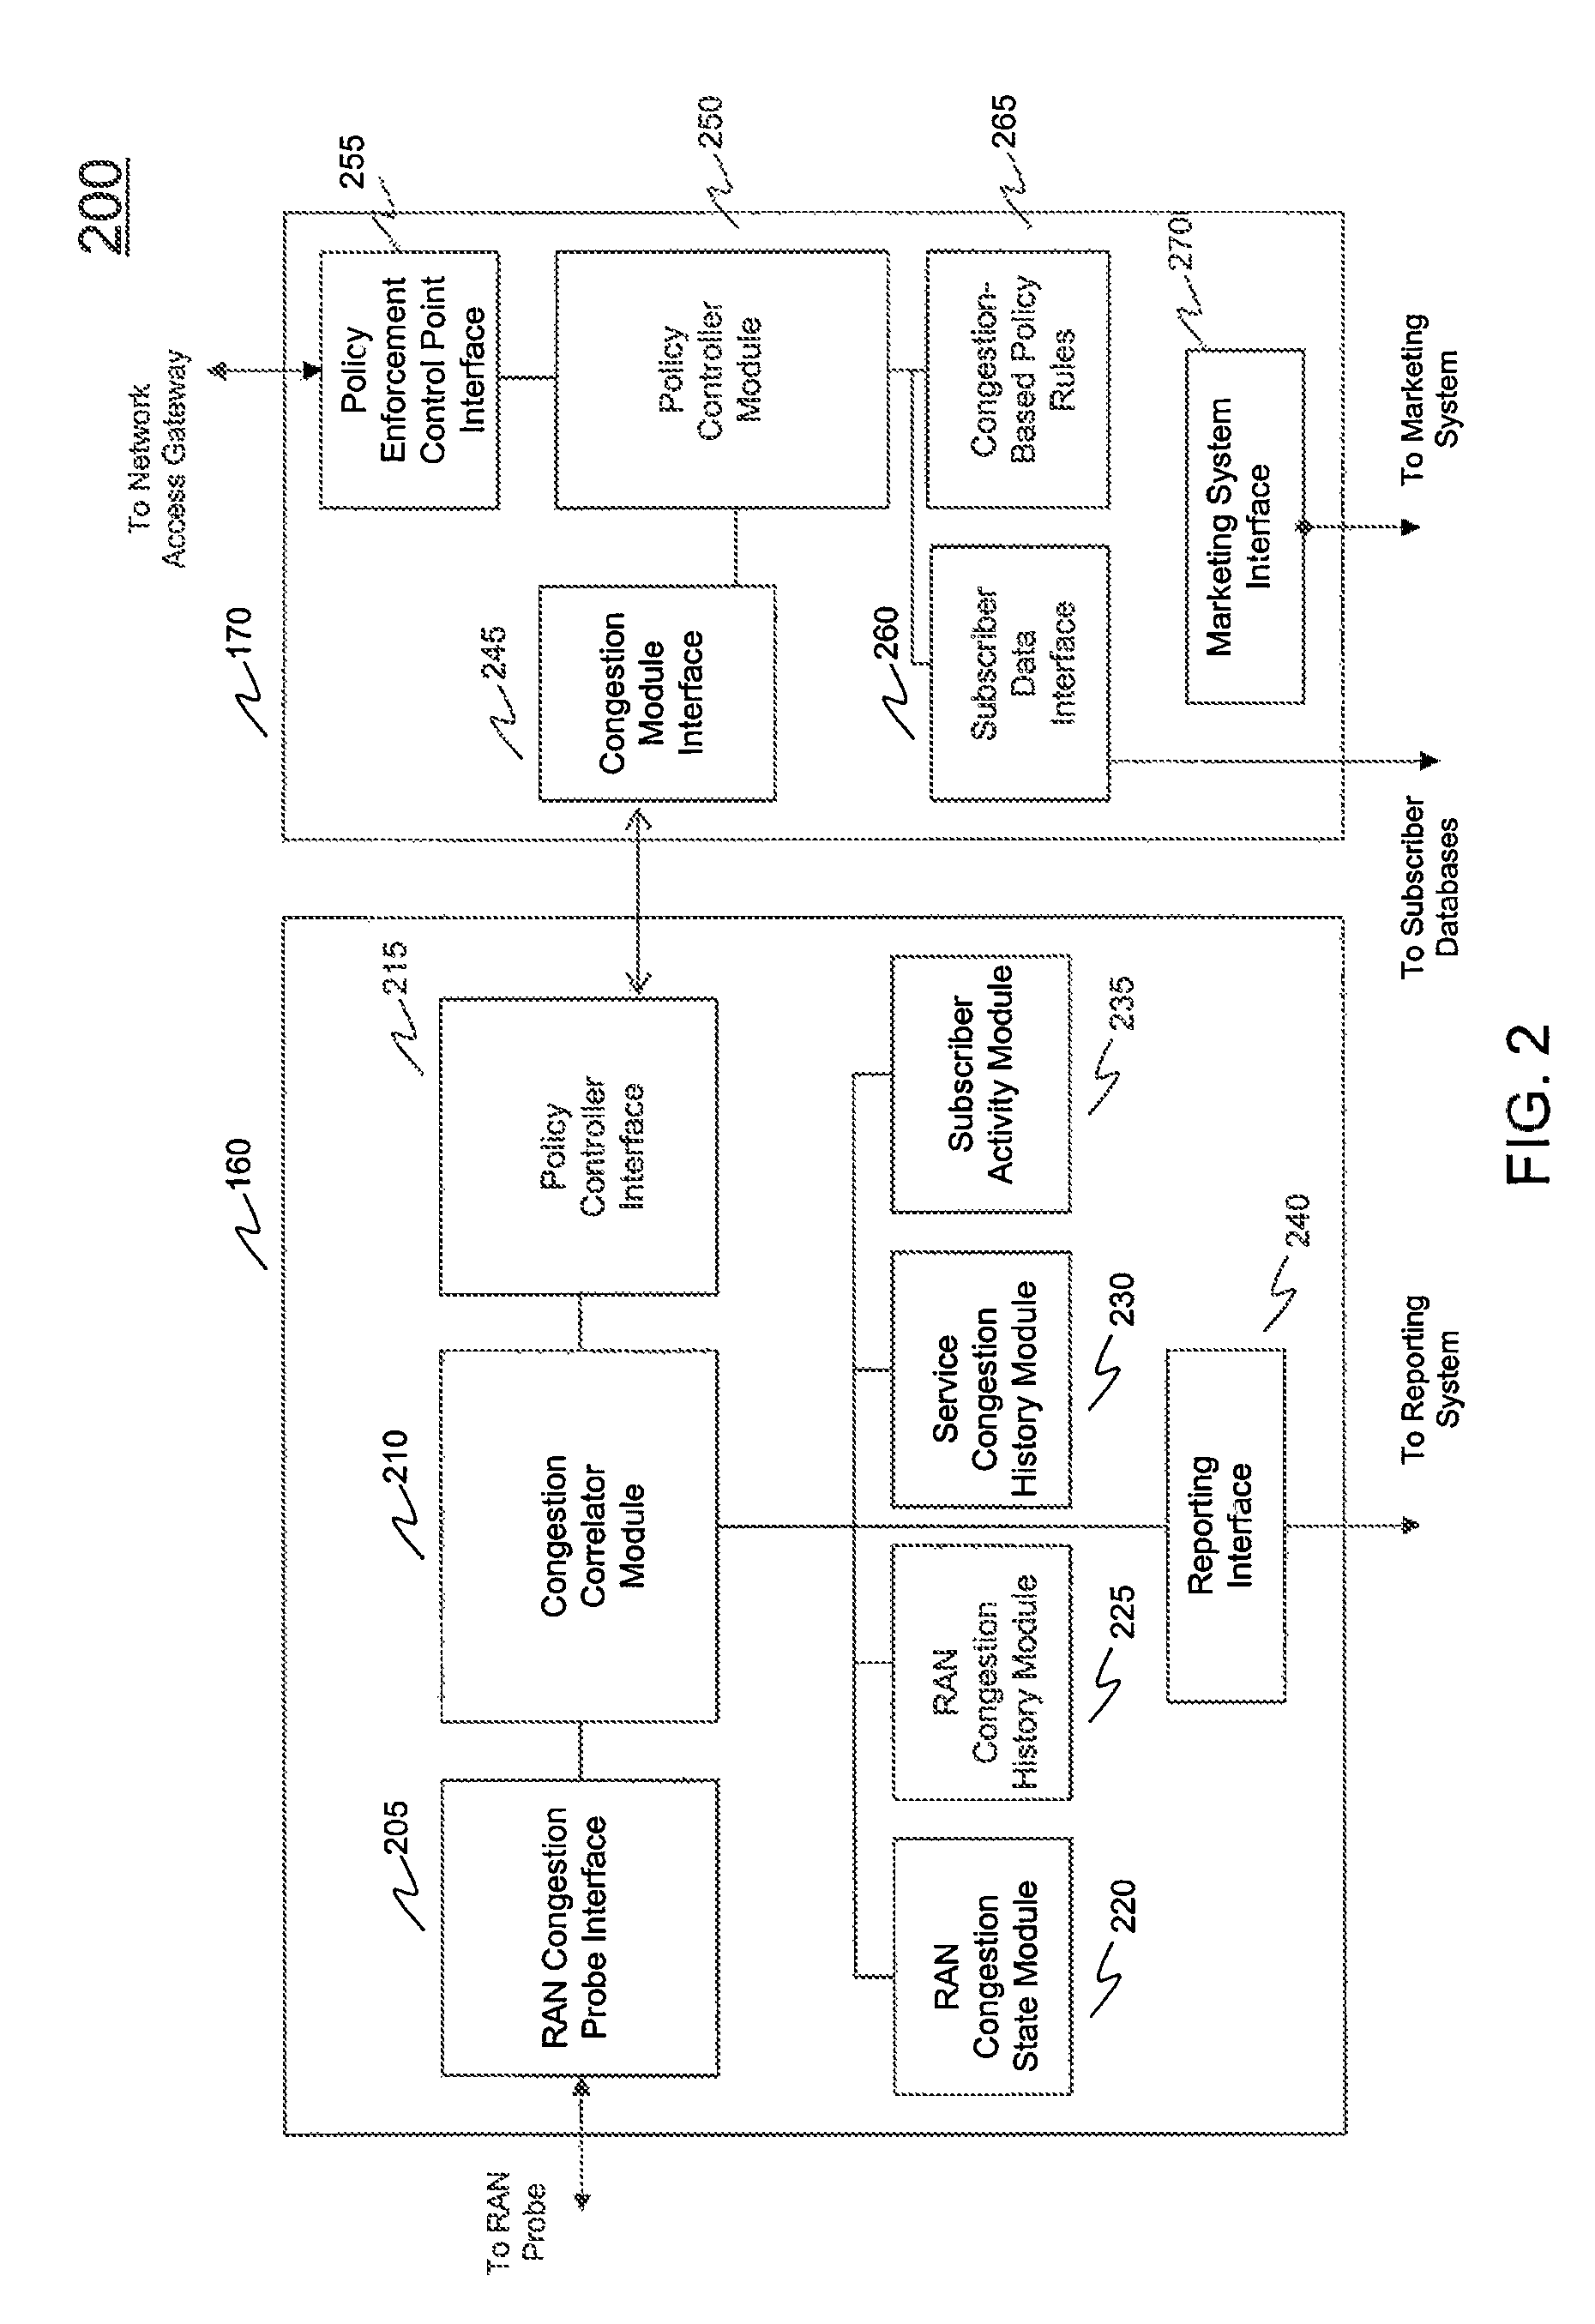 Systems and methods for network congestion management using radio access network congestion indicators